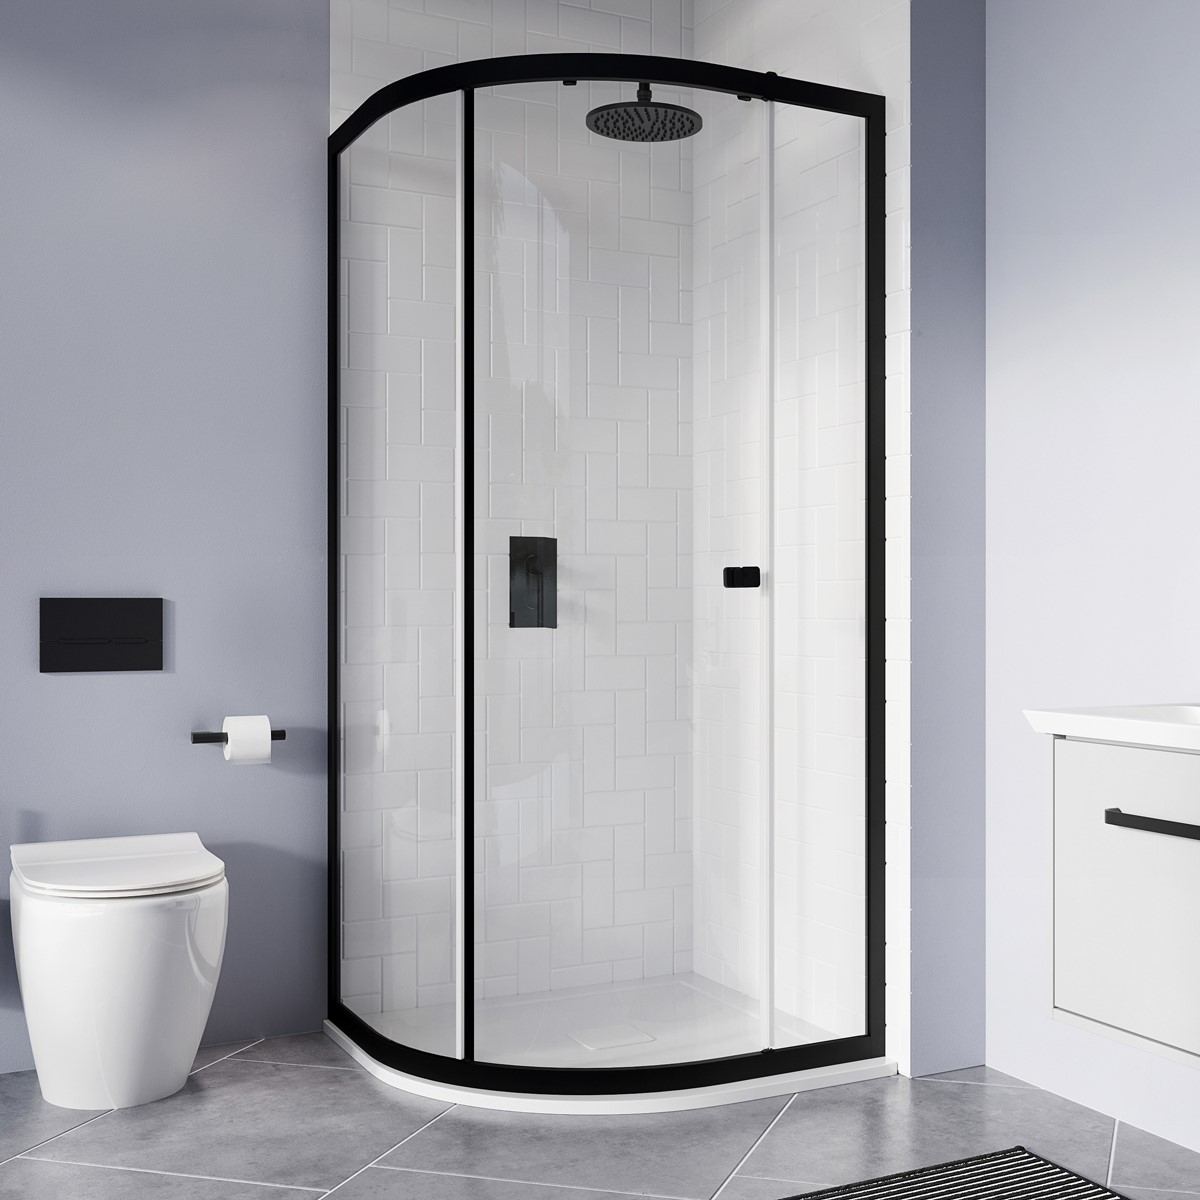 Contemporary Small Bathroom | Discover a space-saving small modern shower solution with Quadrant showers